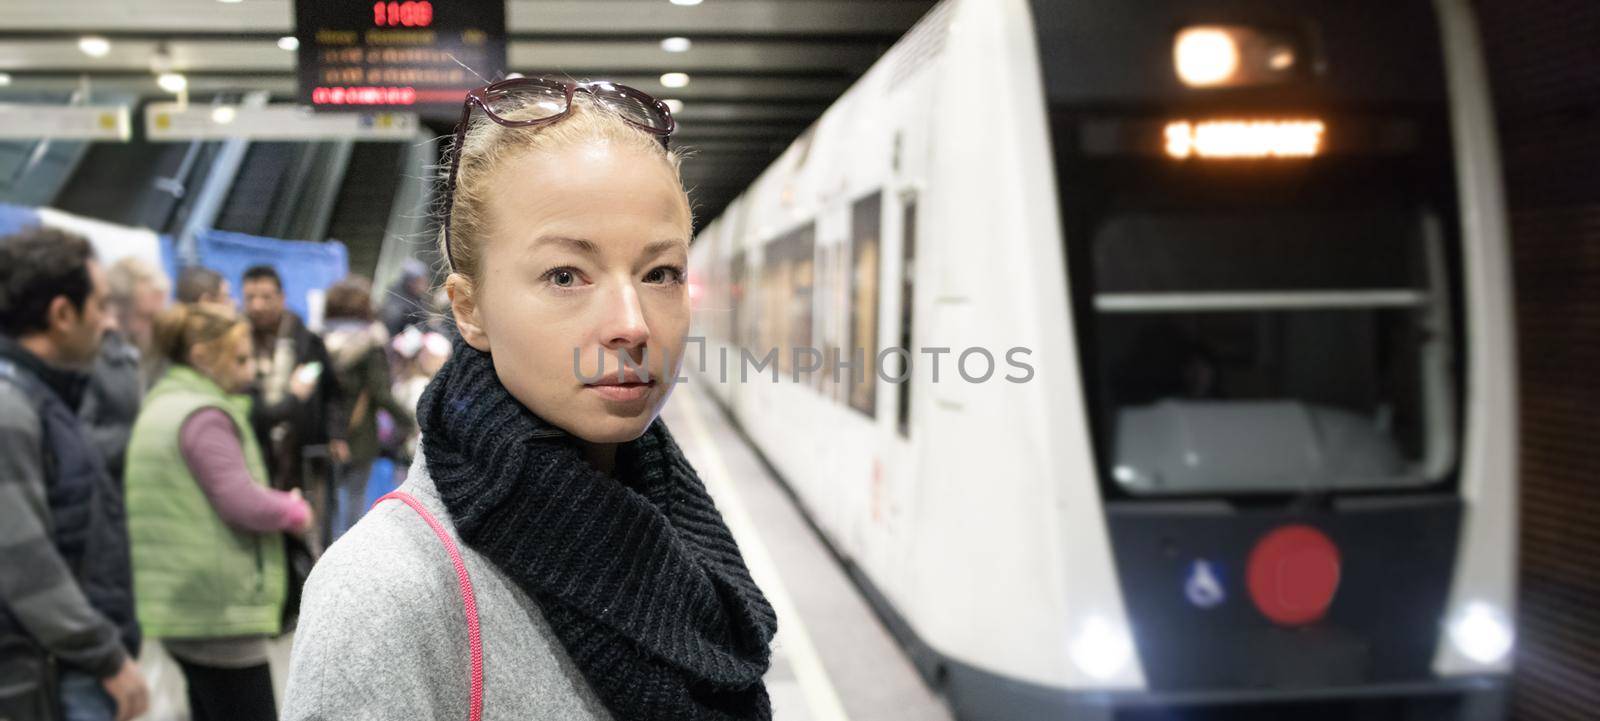 Young woman in winter coat waiting on the platform of a railway station for train to arrive. Public transport by kasto